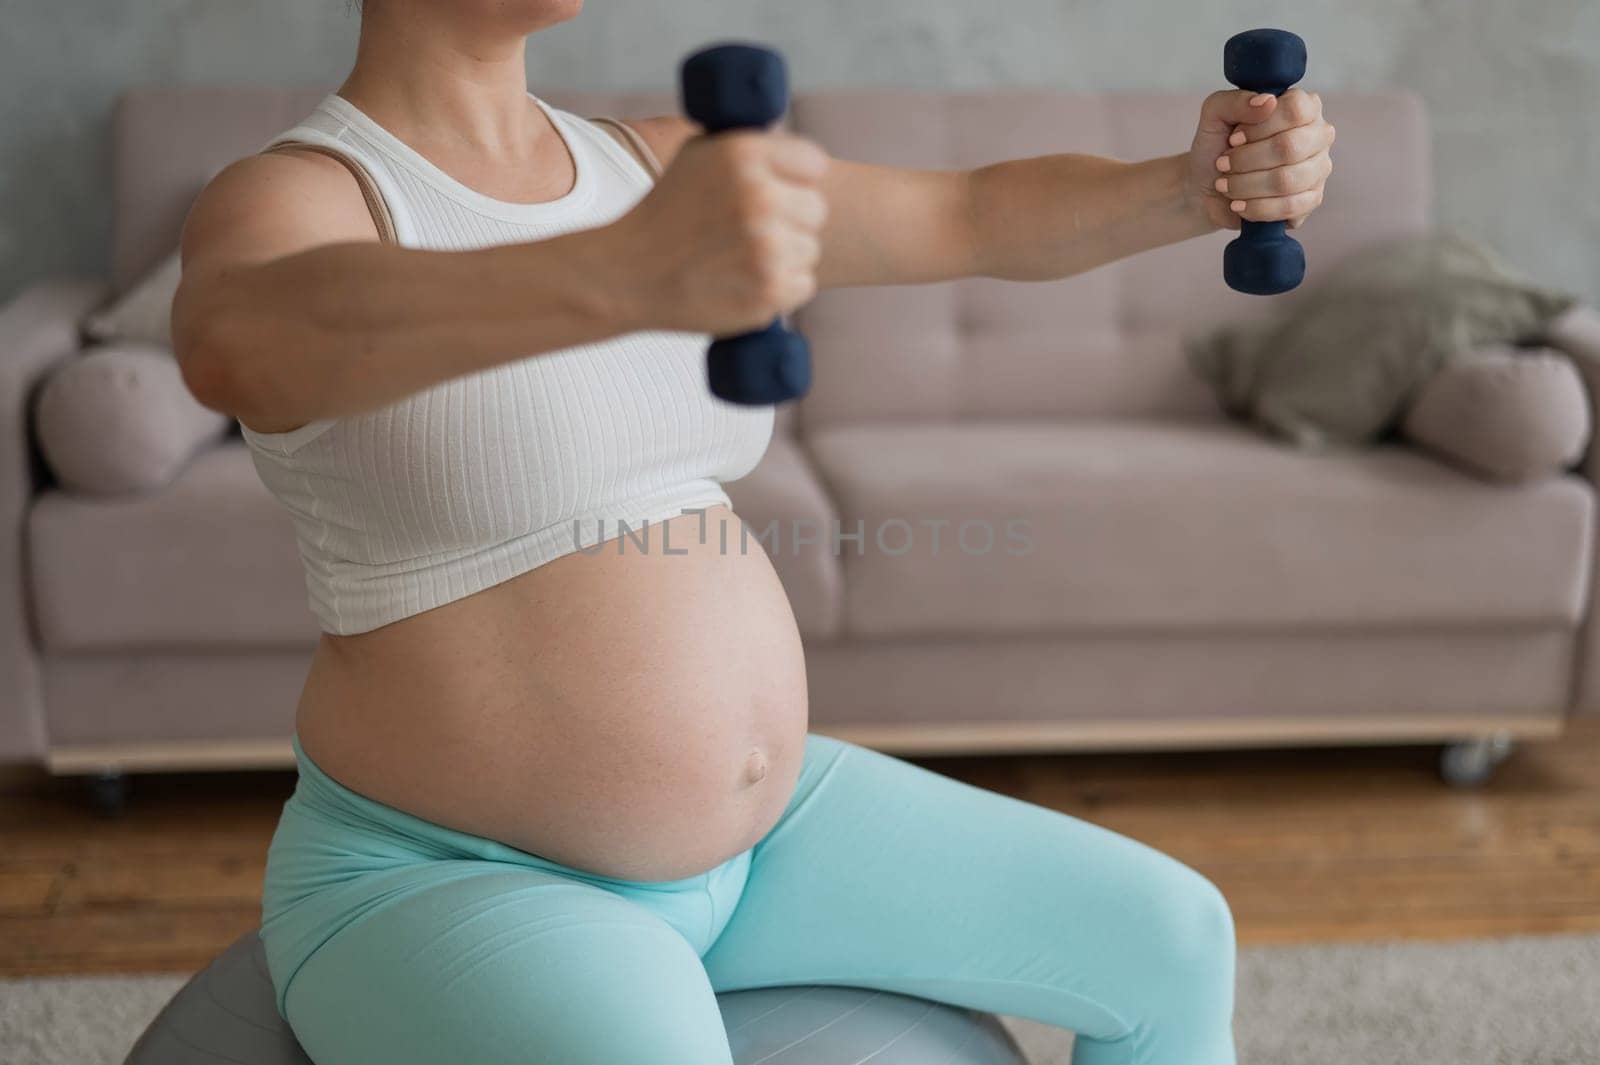 Pregnant woman doing exercises with dumbbells while sitting on a fitness ball at home. Close-up of a pregnant belly